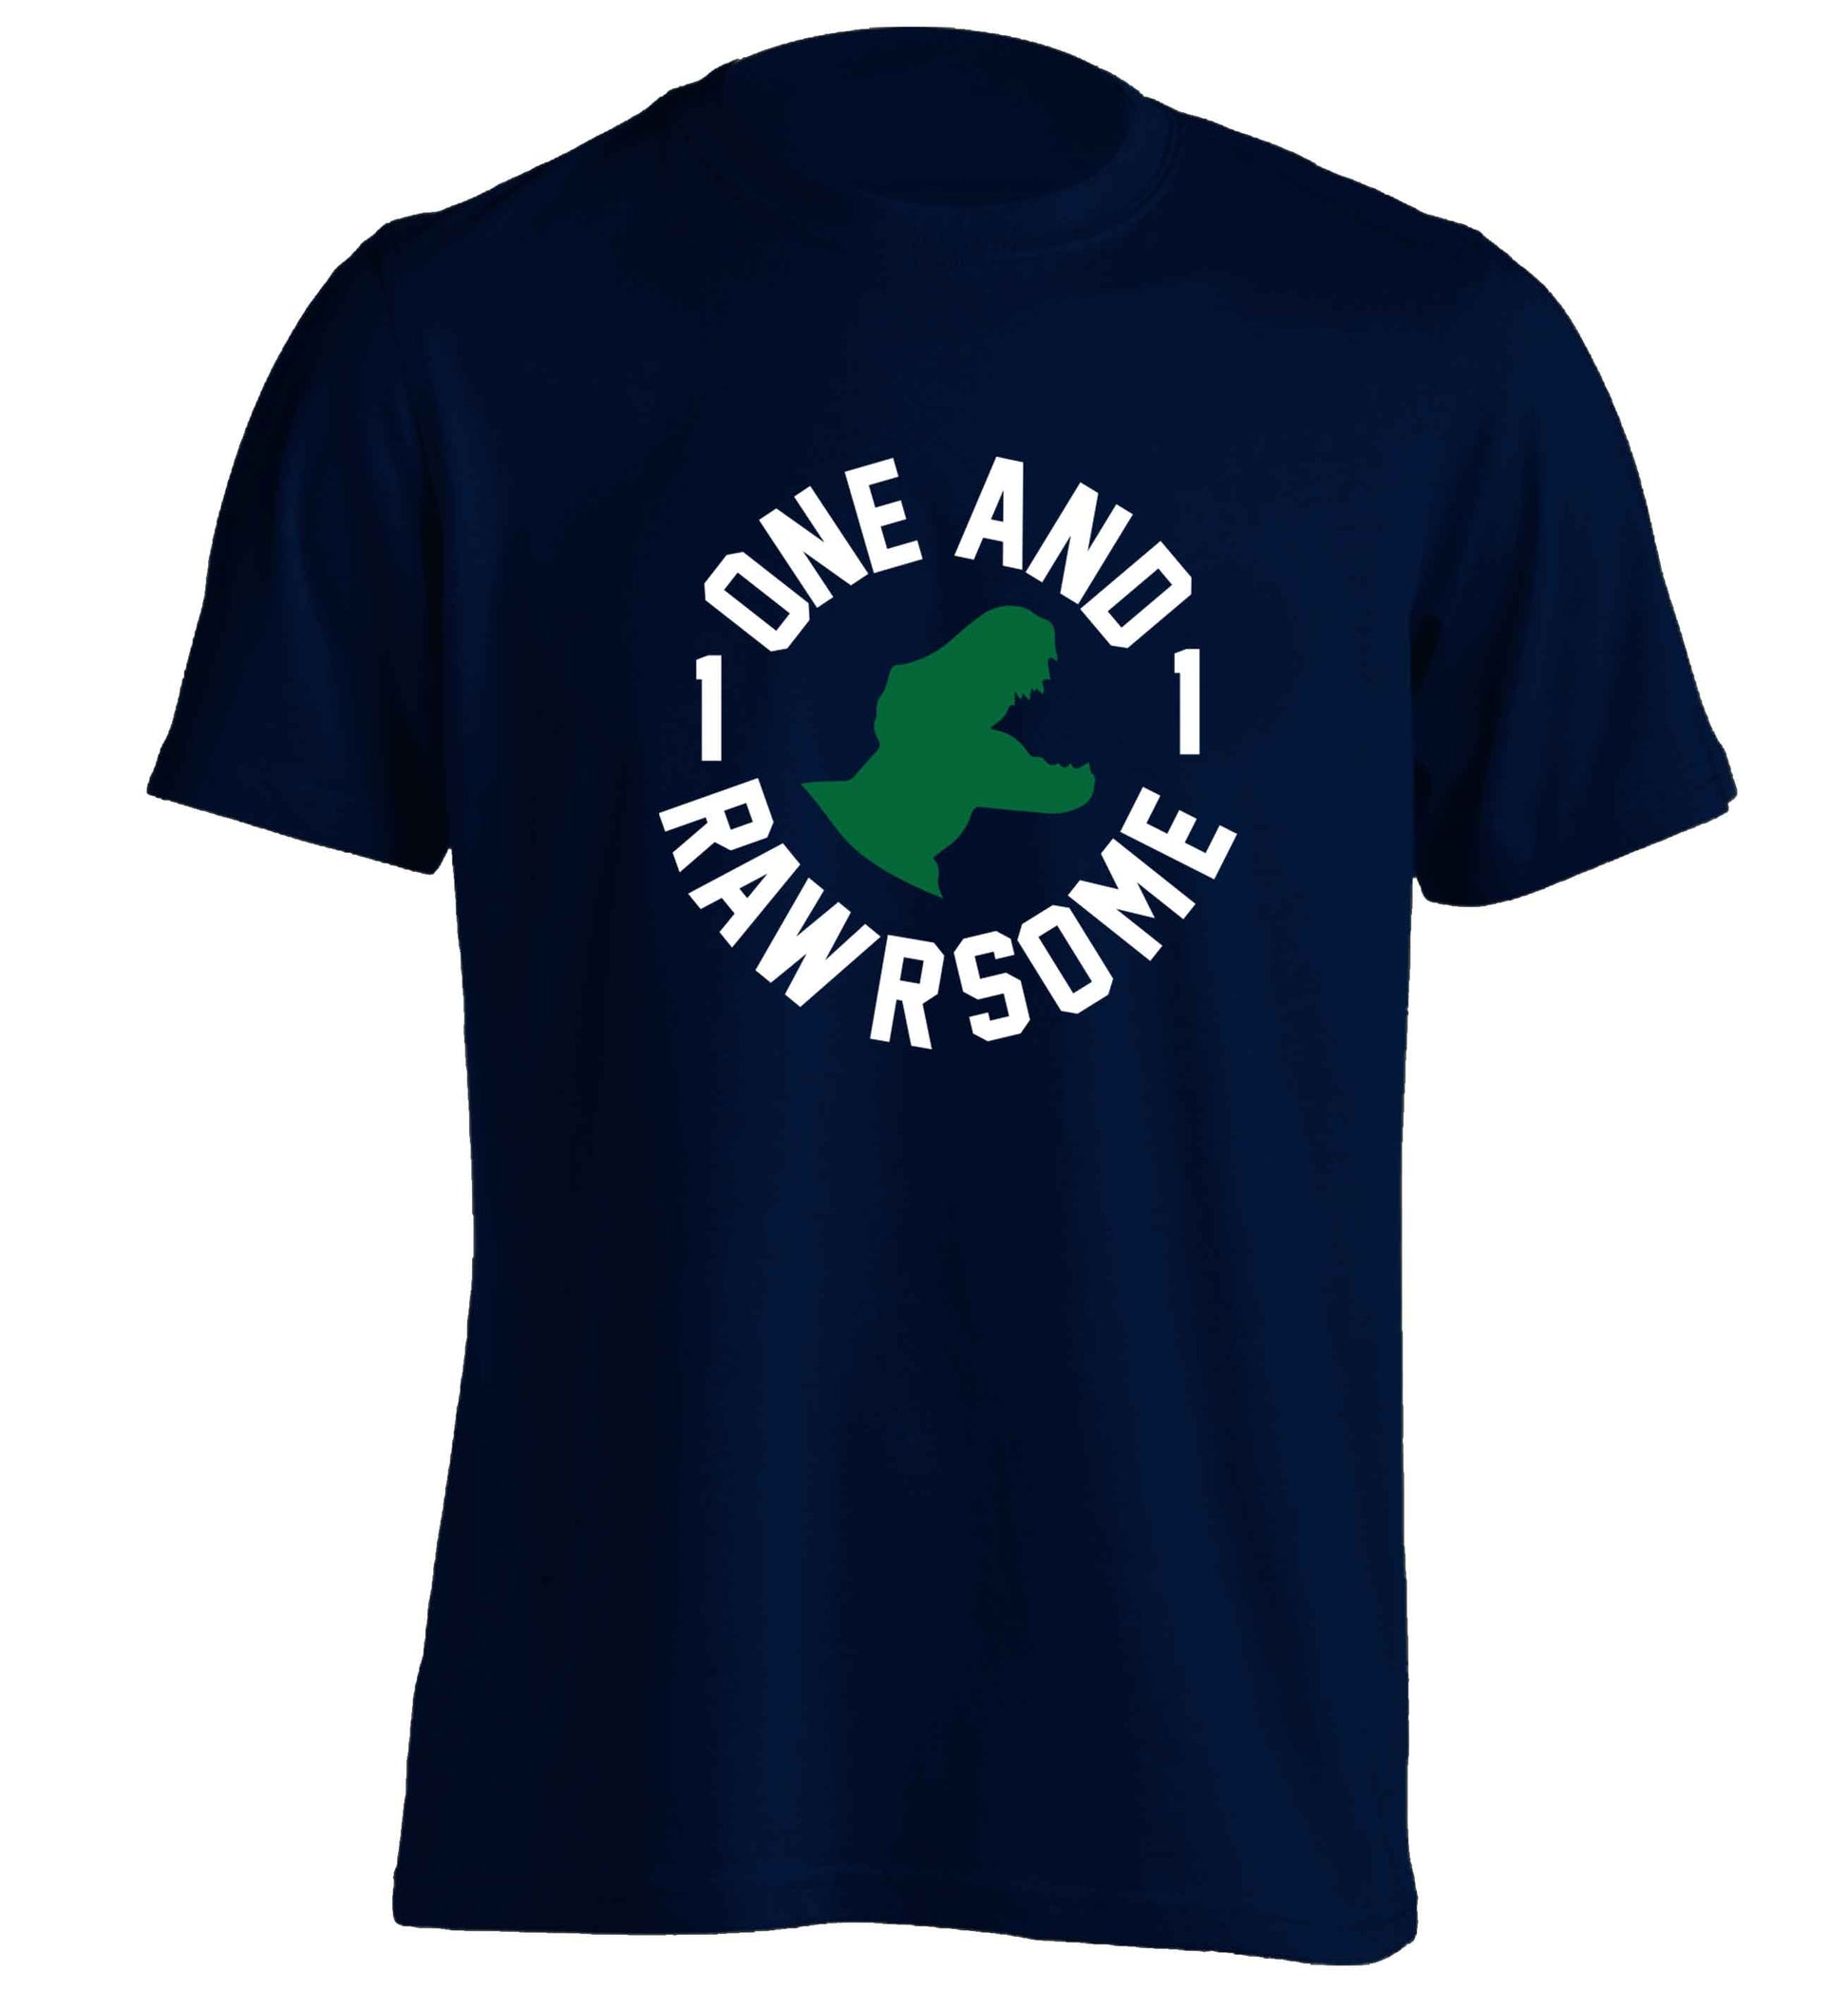 One and Rawrsome adults unisex navy Tshirt 2XL